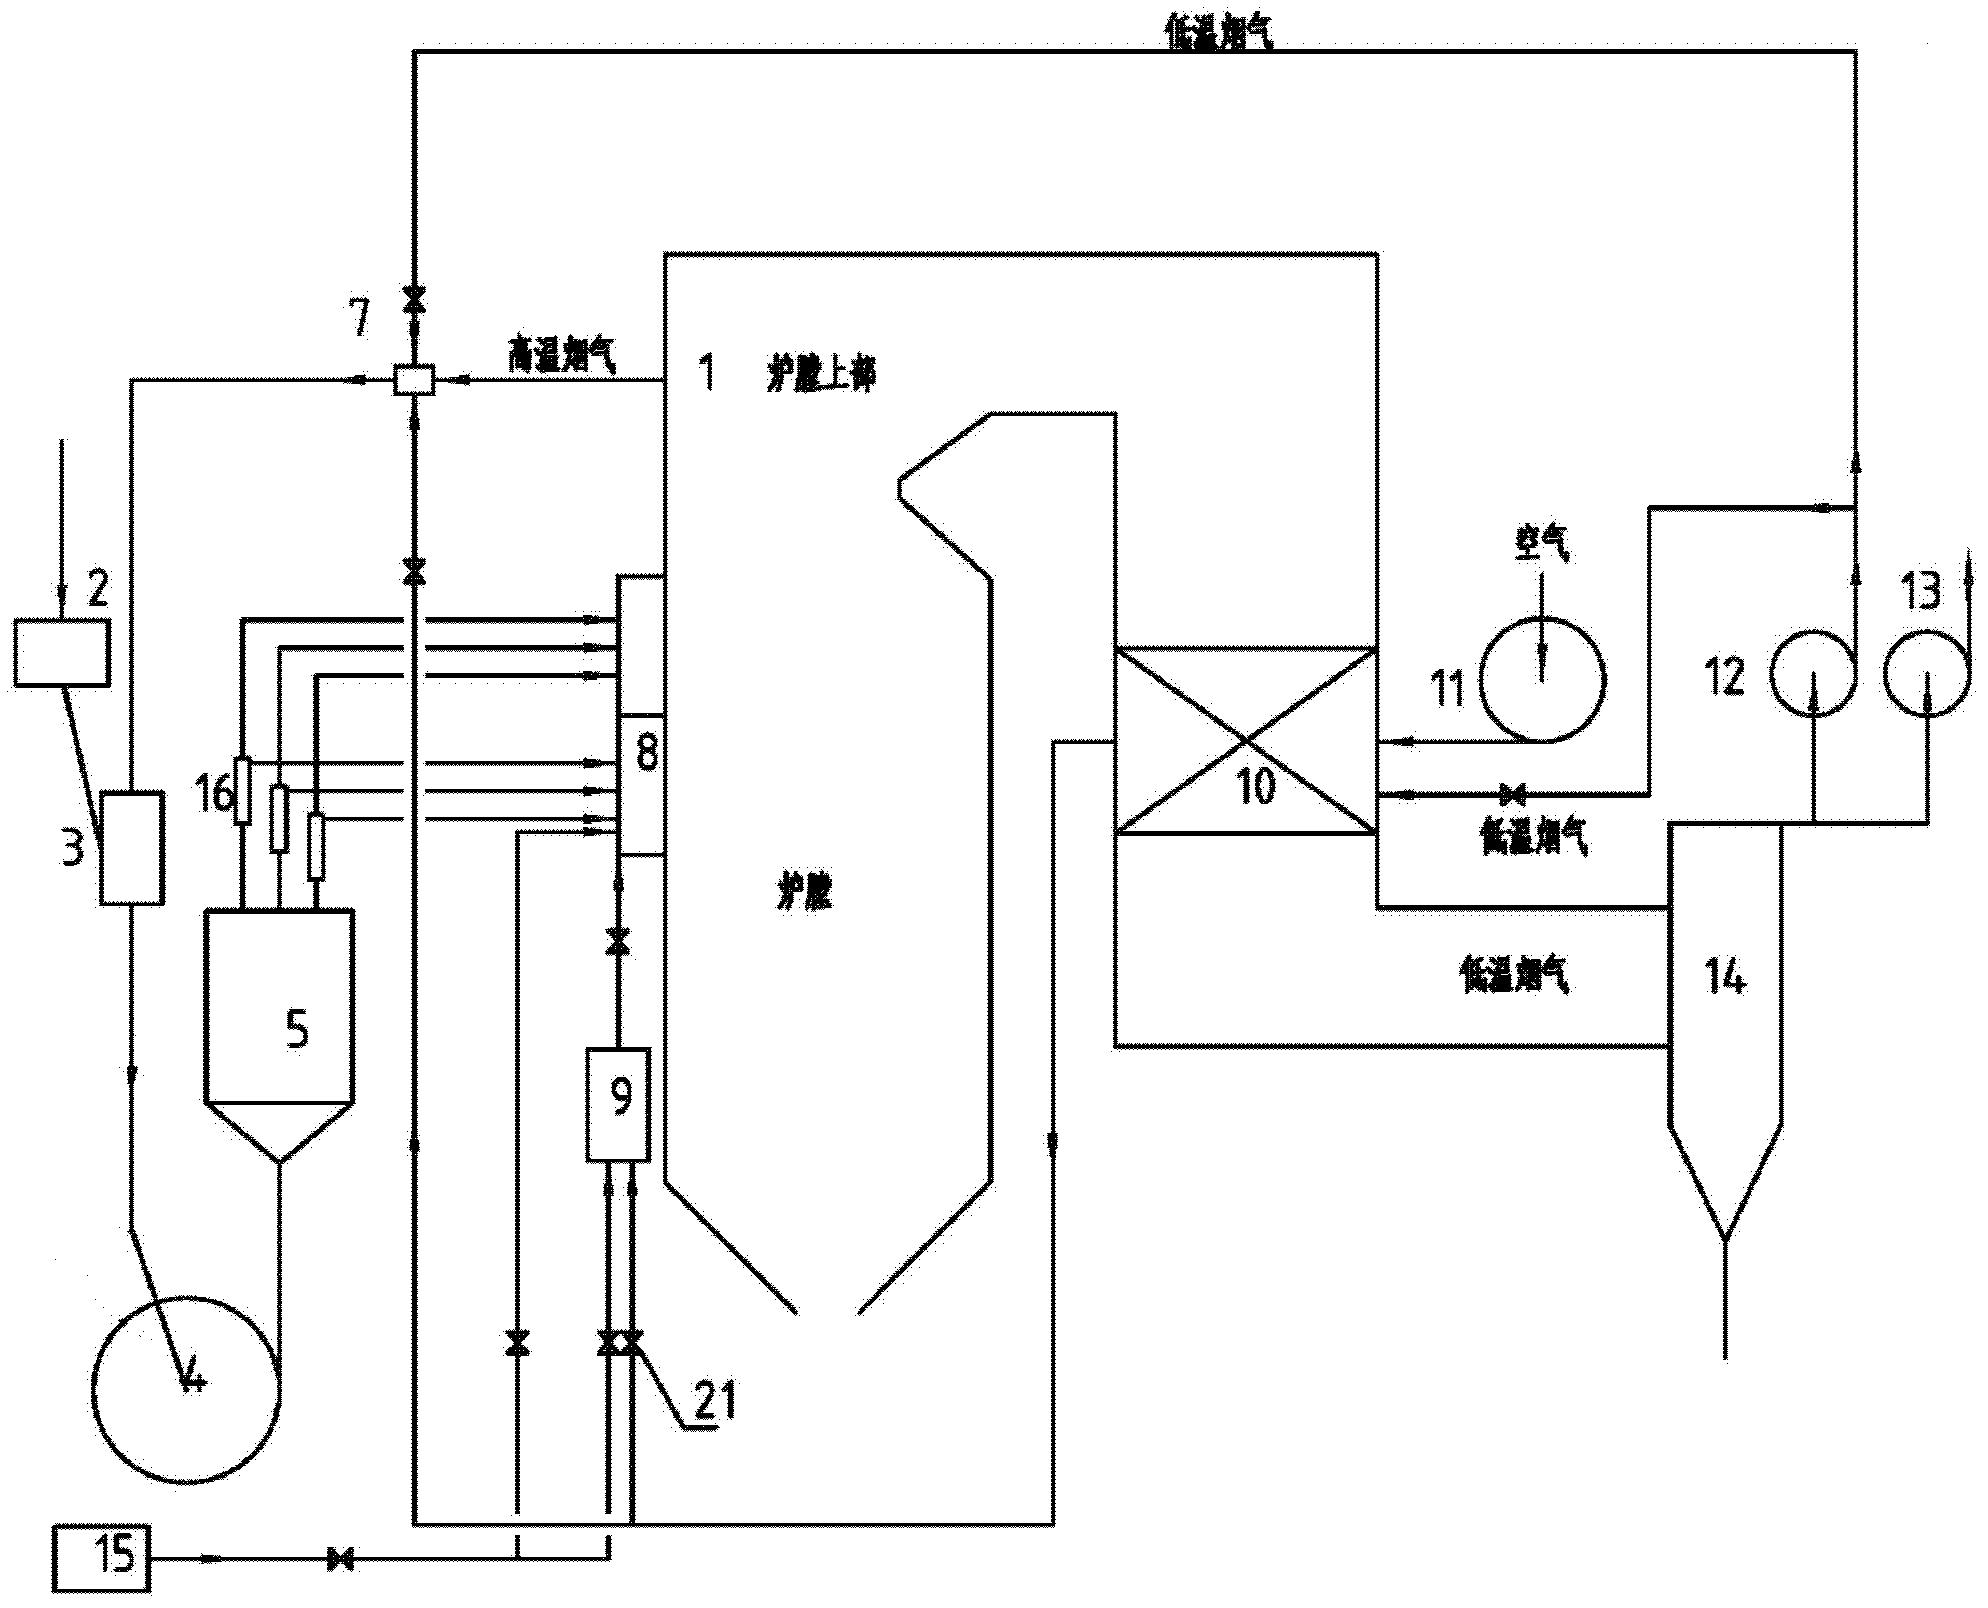 Coal powder combustion system used in high-moisture type coal oxygen-enriched combustion